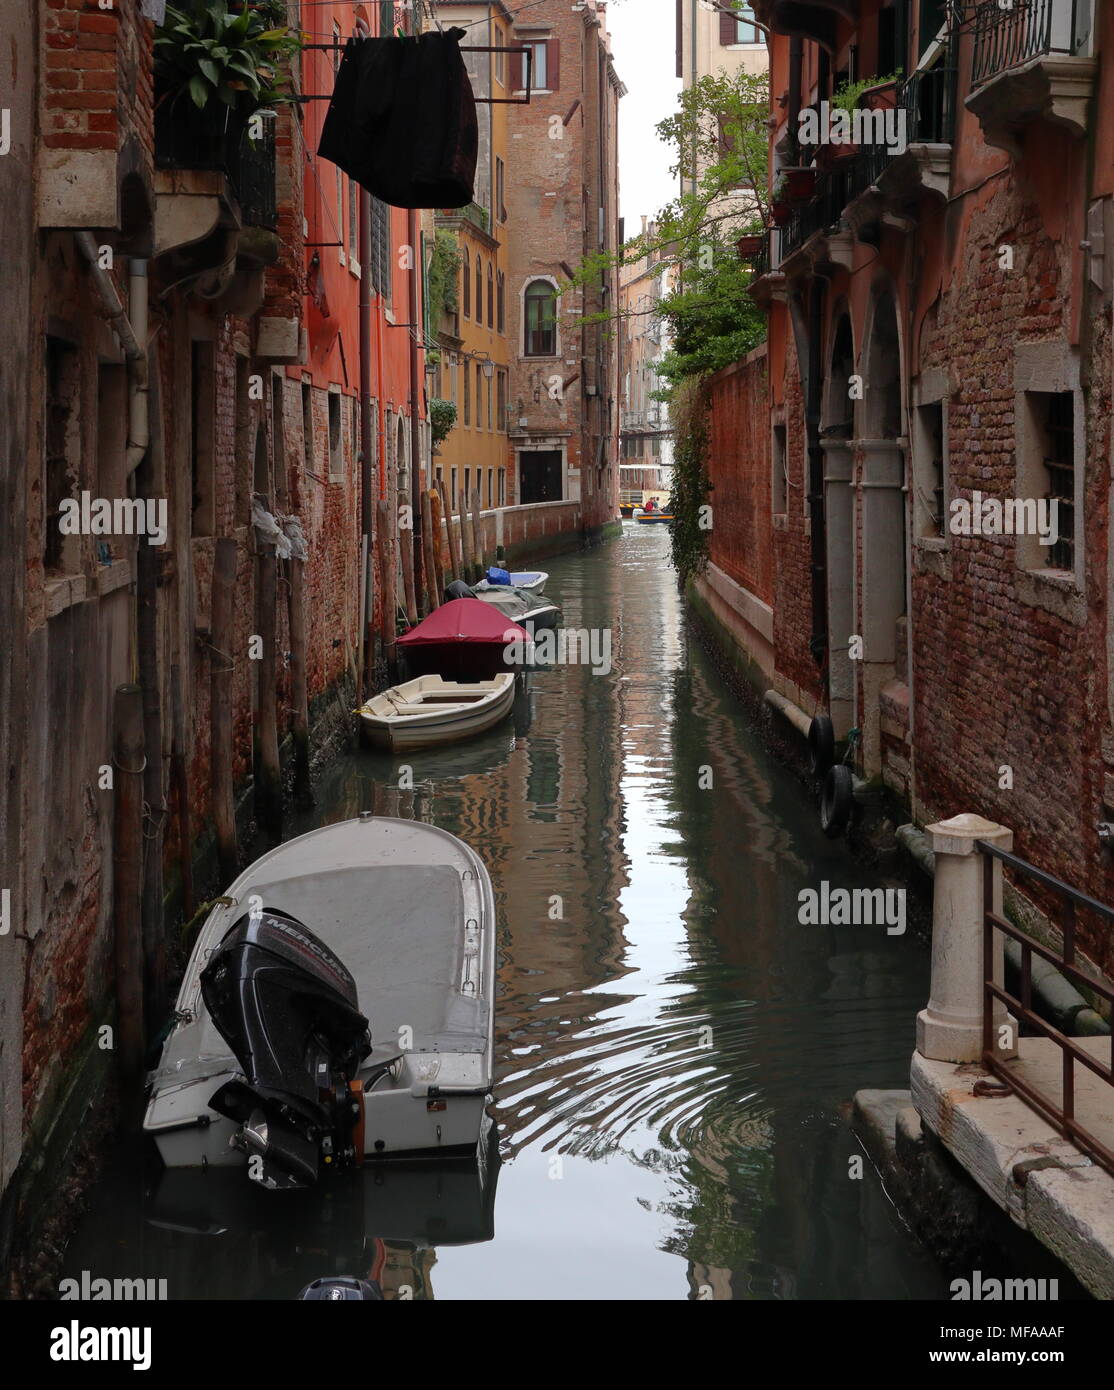 Narrow canal with boats, calm water, picturesque scenery, Venice, Italy, Europe Stock Photo